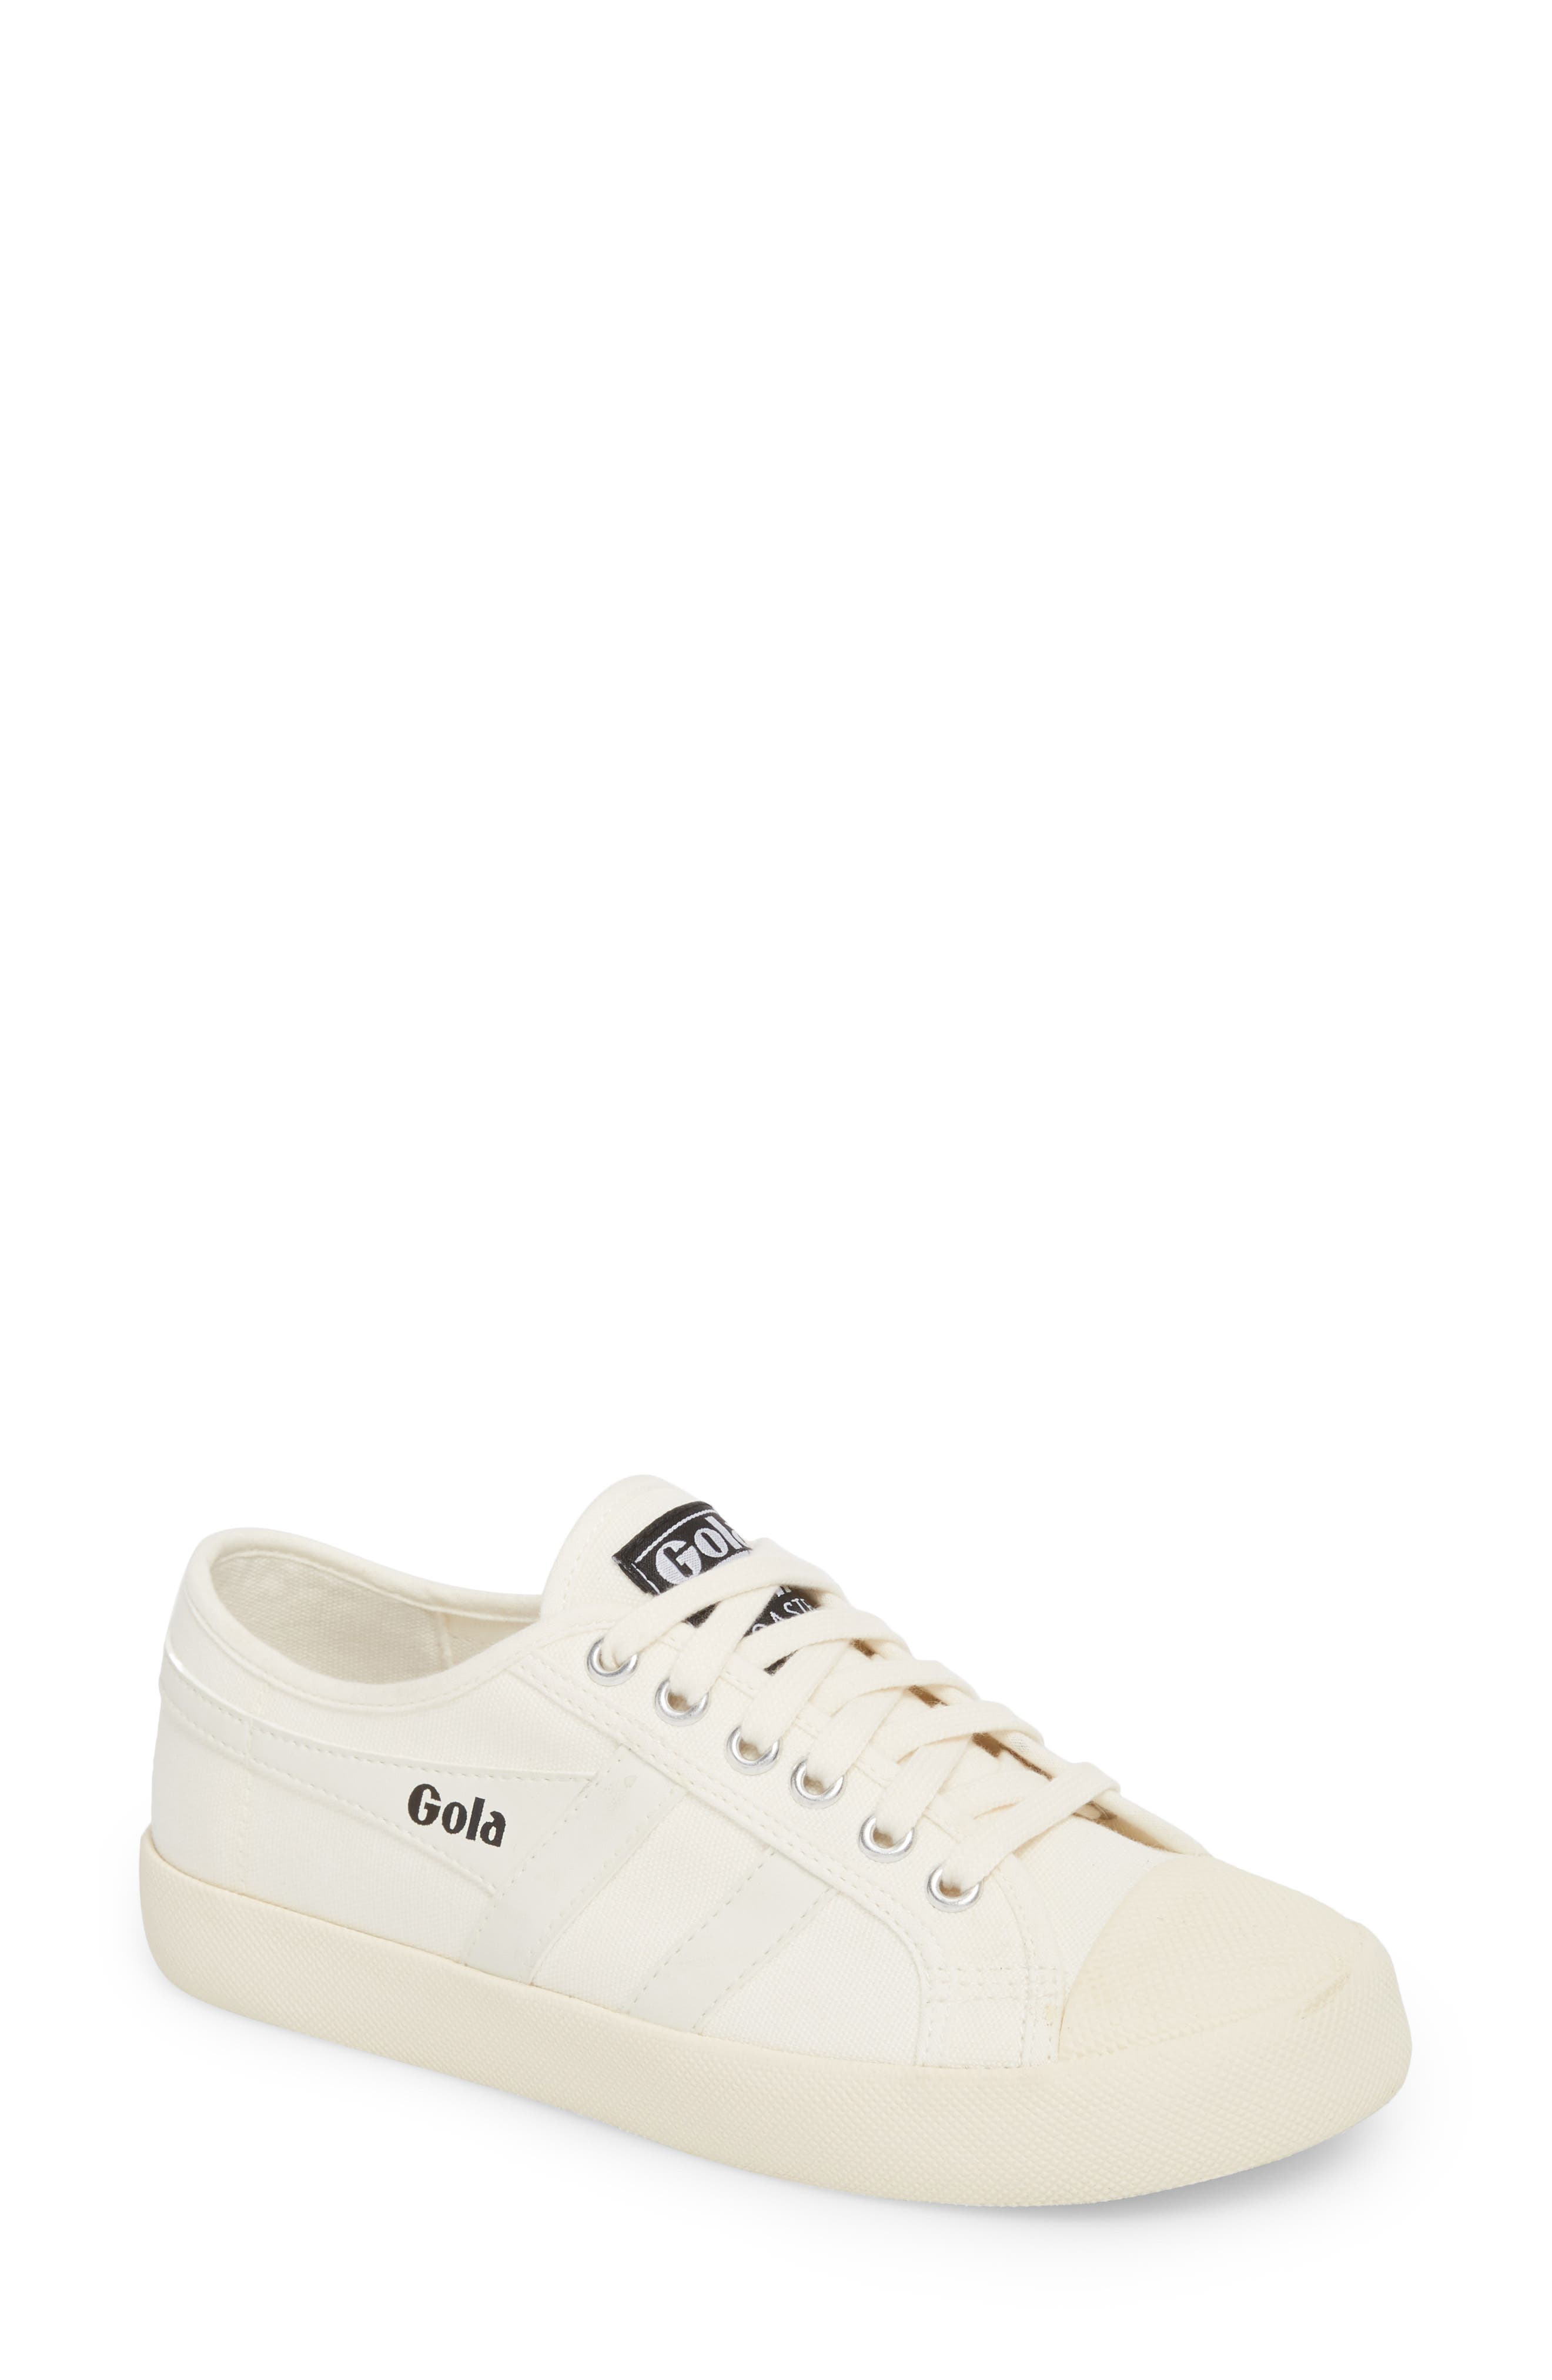 Gola Womens G Fitness Shoes